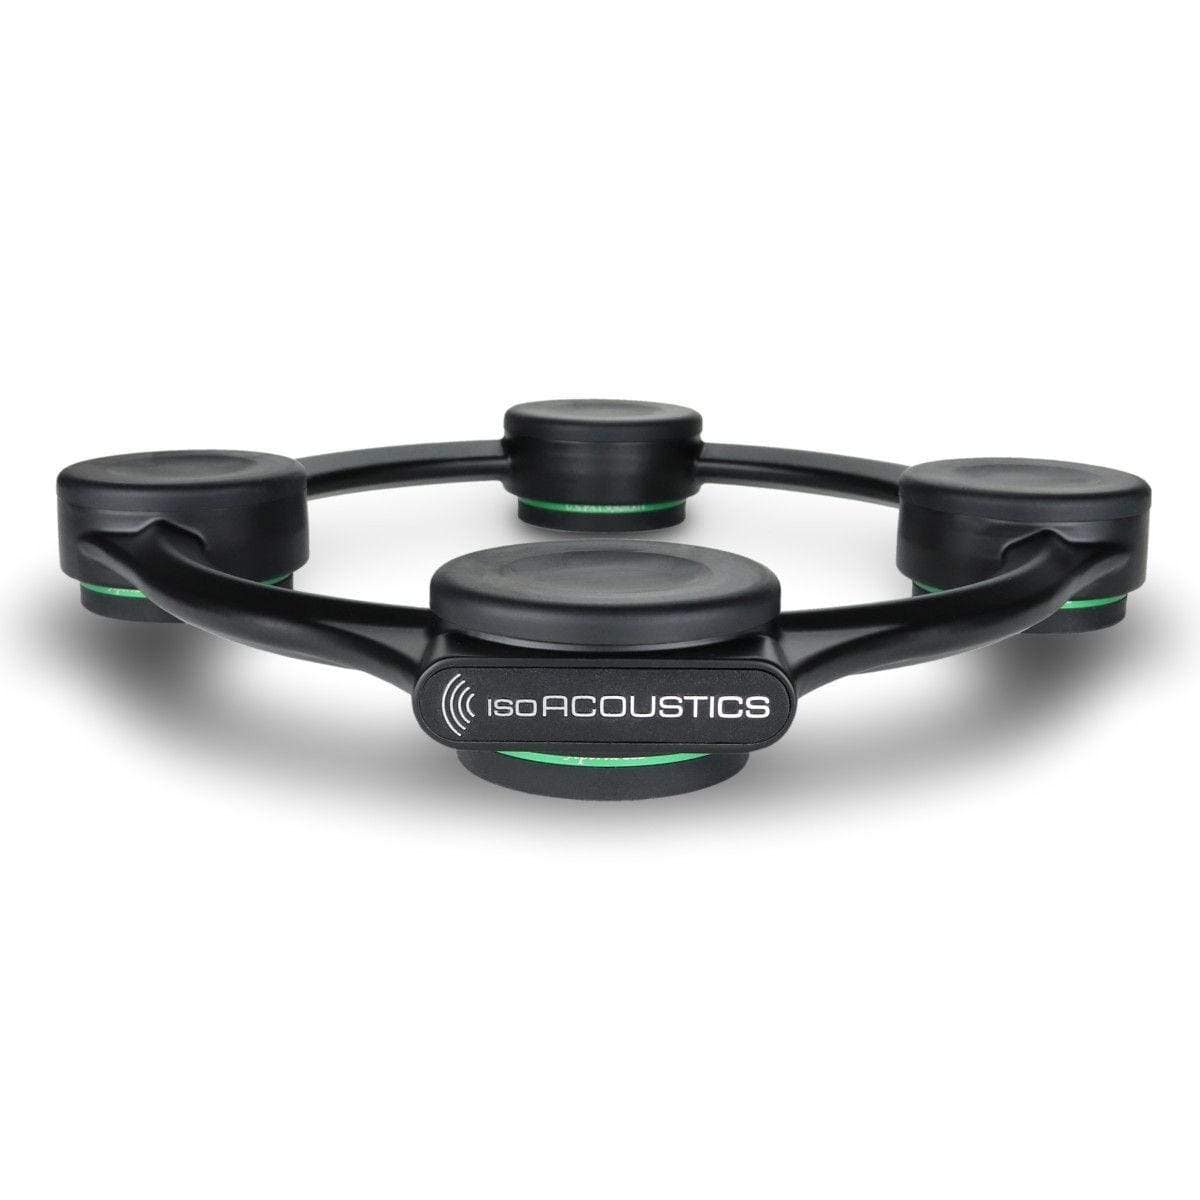 IsoAcoustics IsoAcoustics Aperta Sub Isolation Stand For Subwoofers Isolation Devices